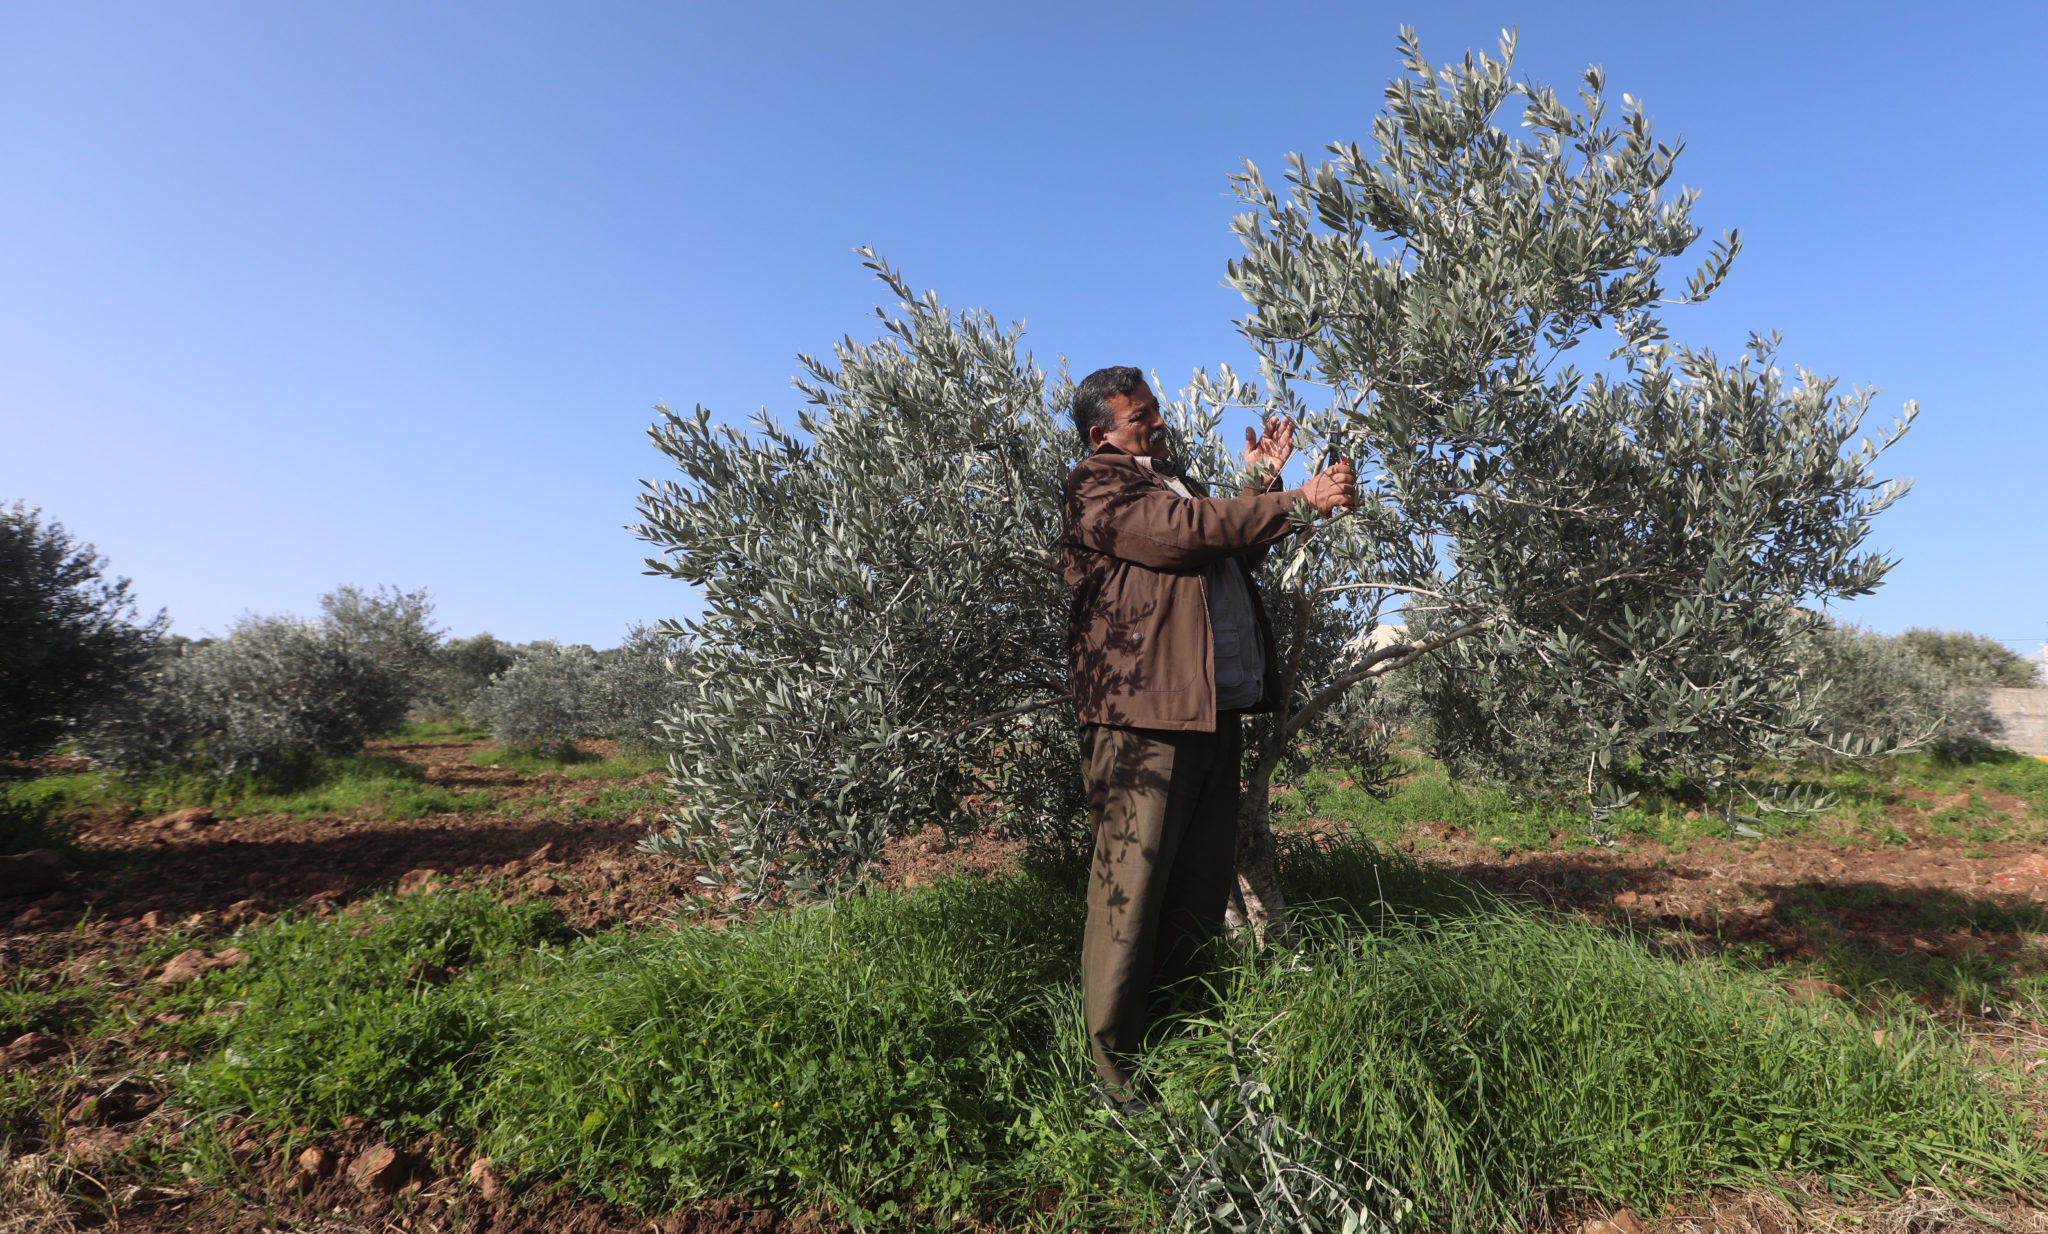 You are currently viewing Live from the olive groves in Palestine